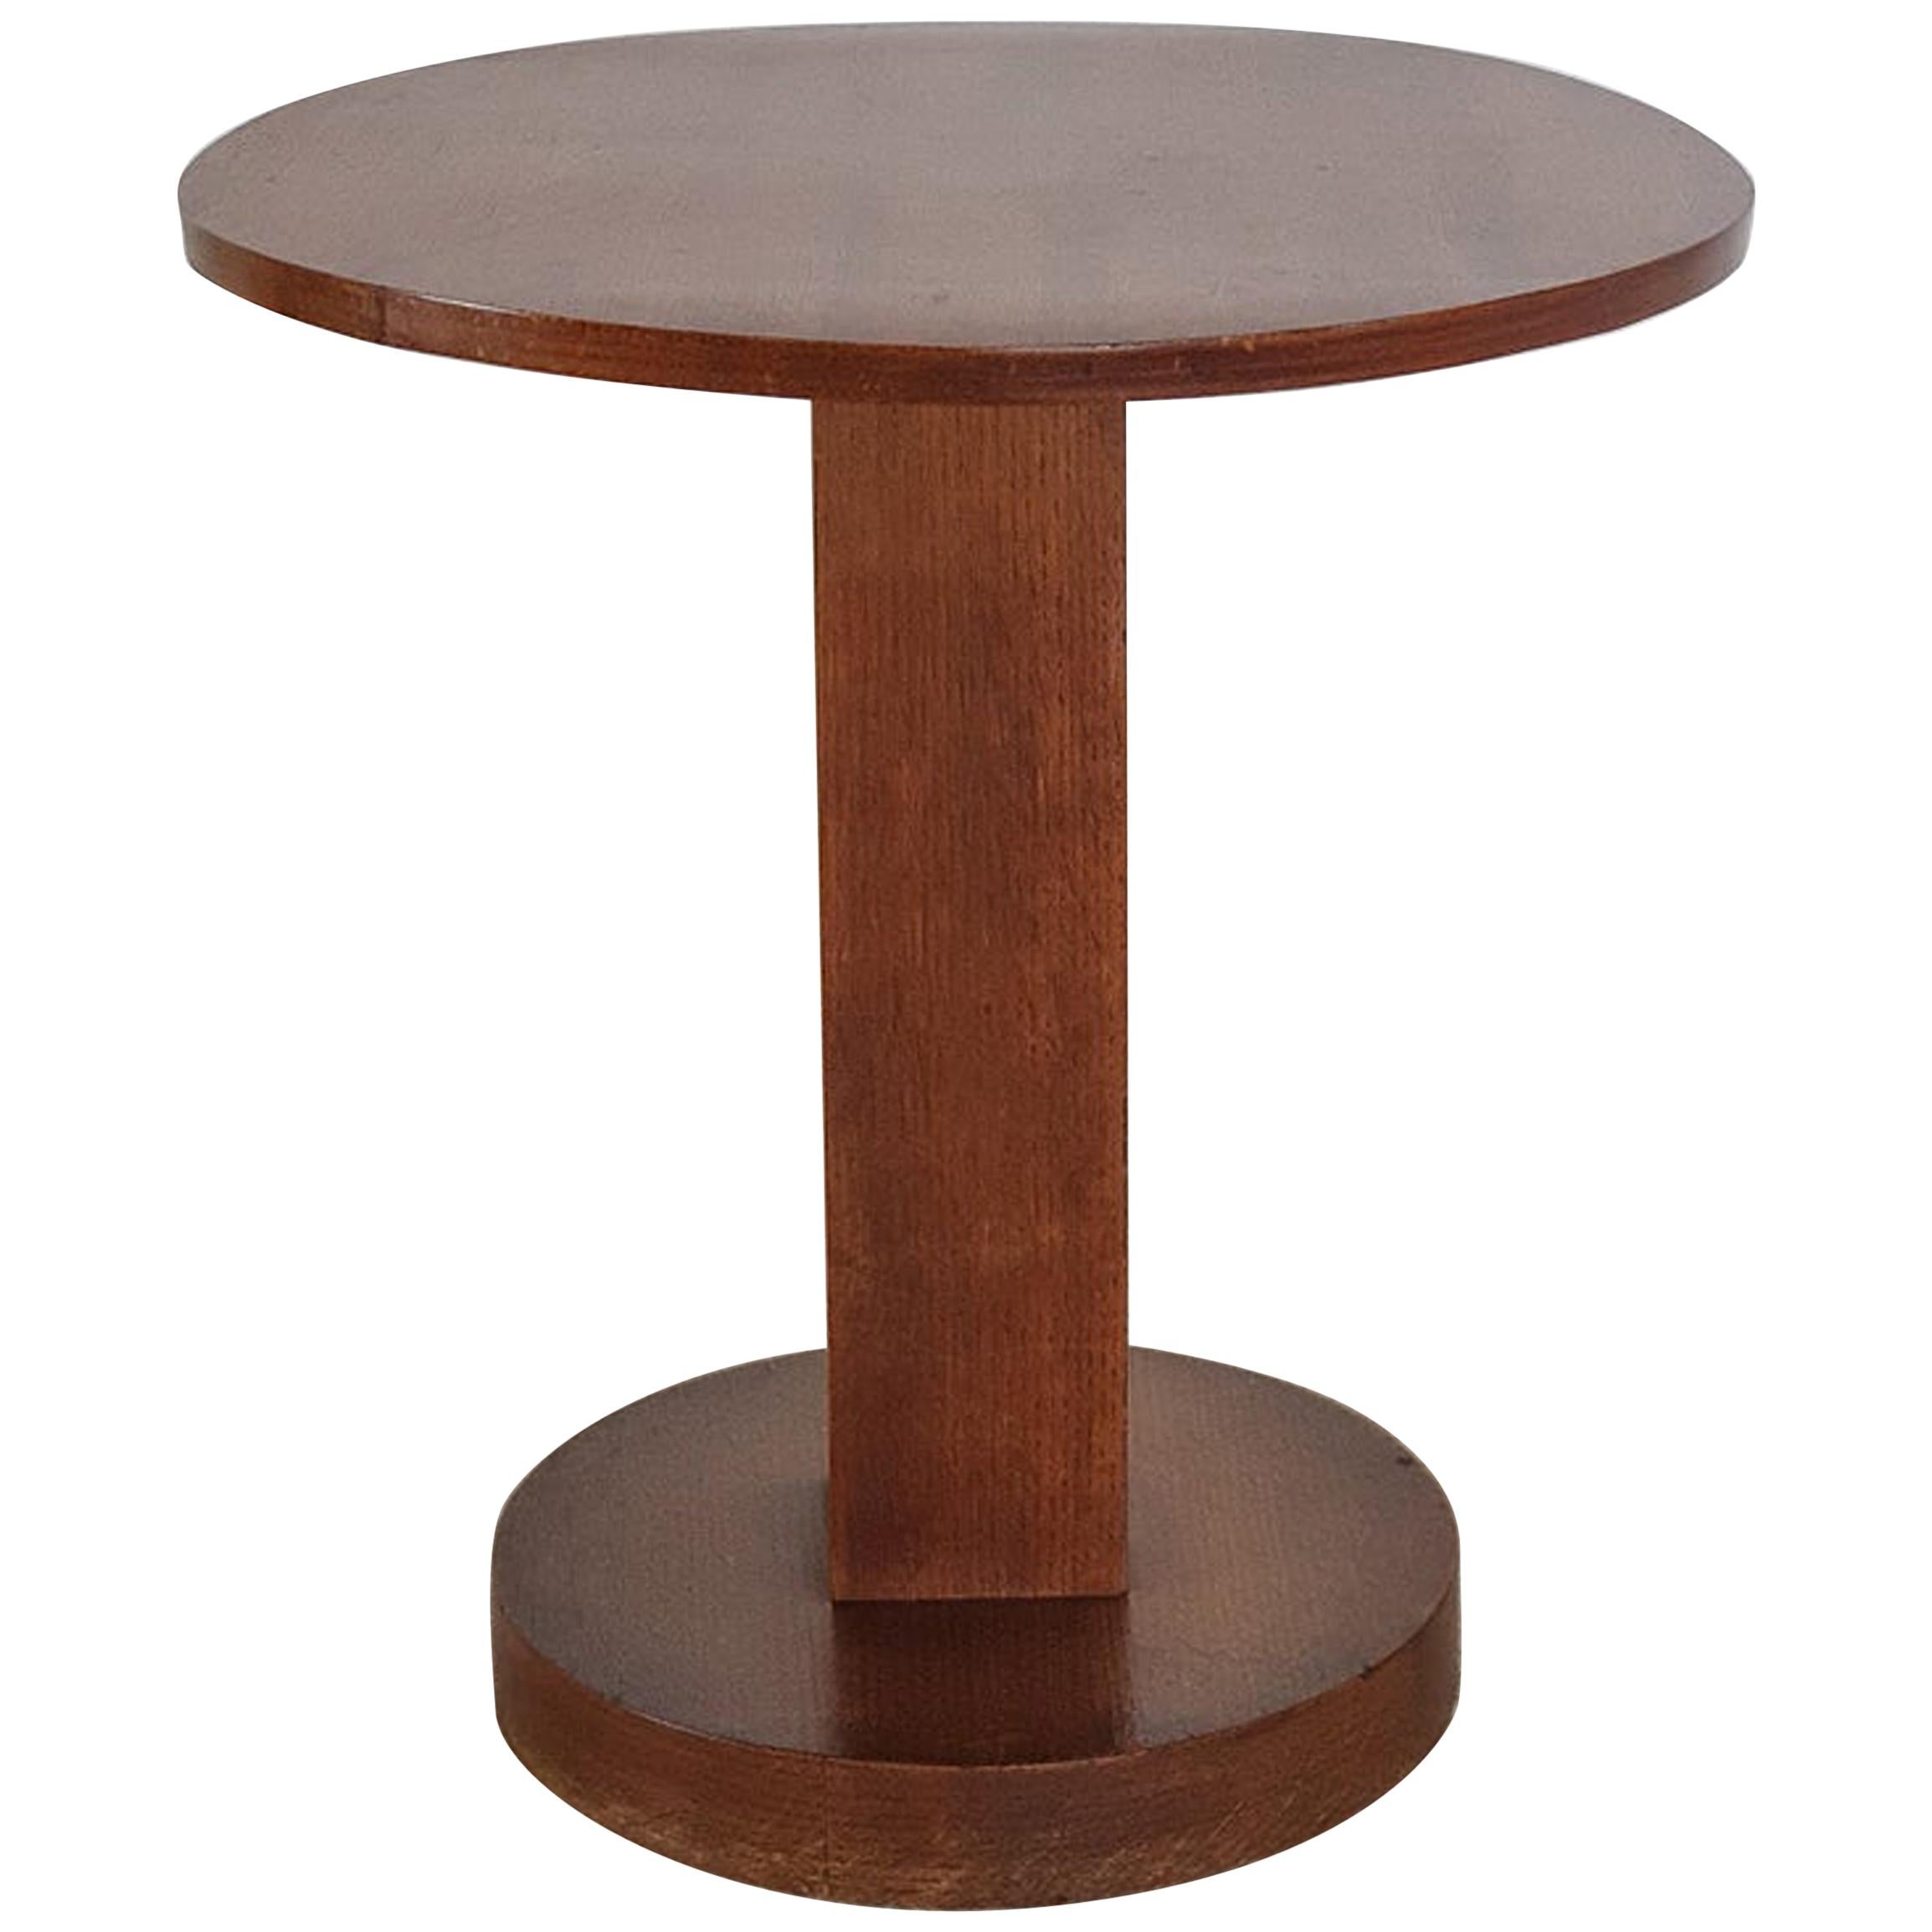 Unique Art Deco Side Table in Wood